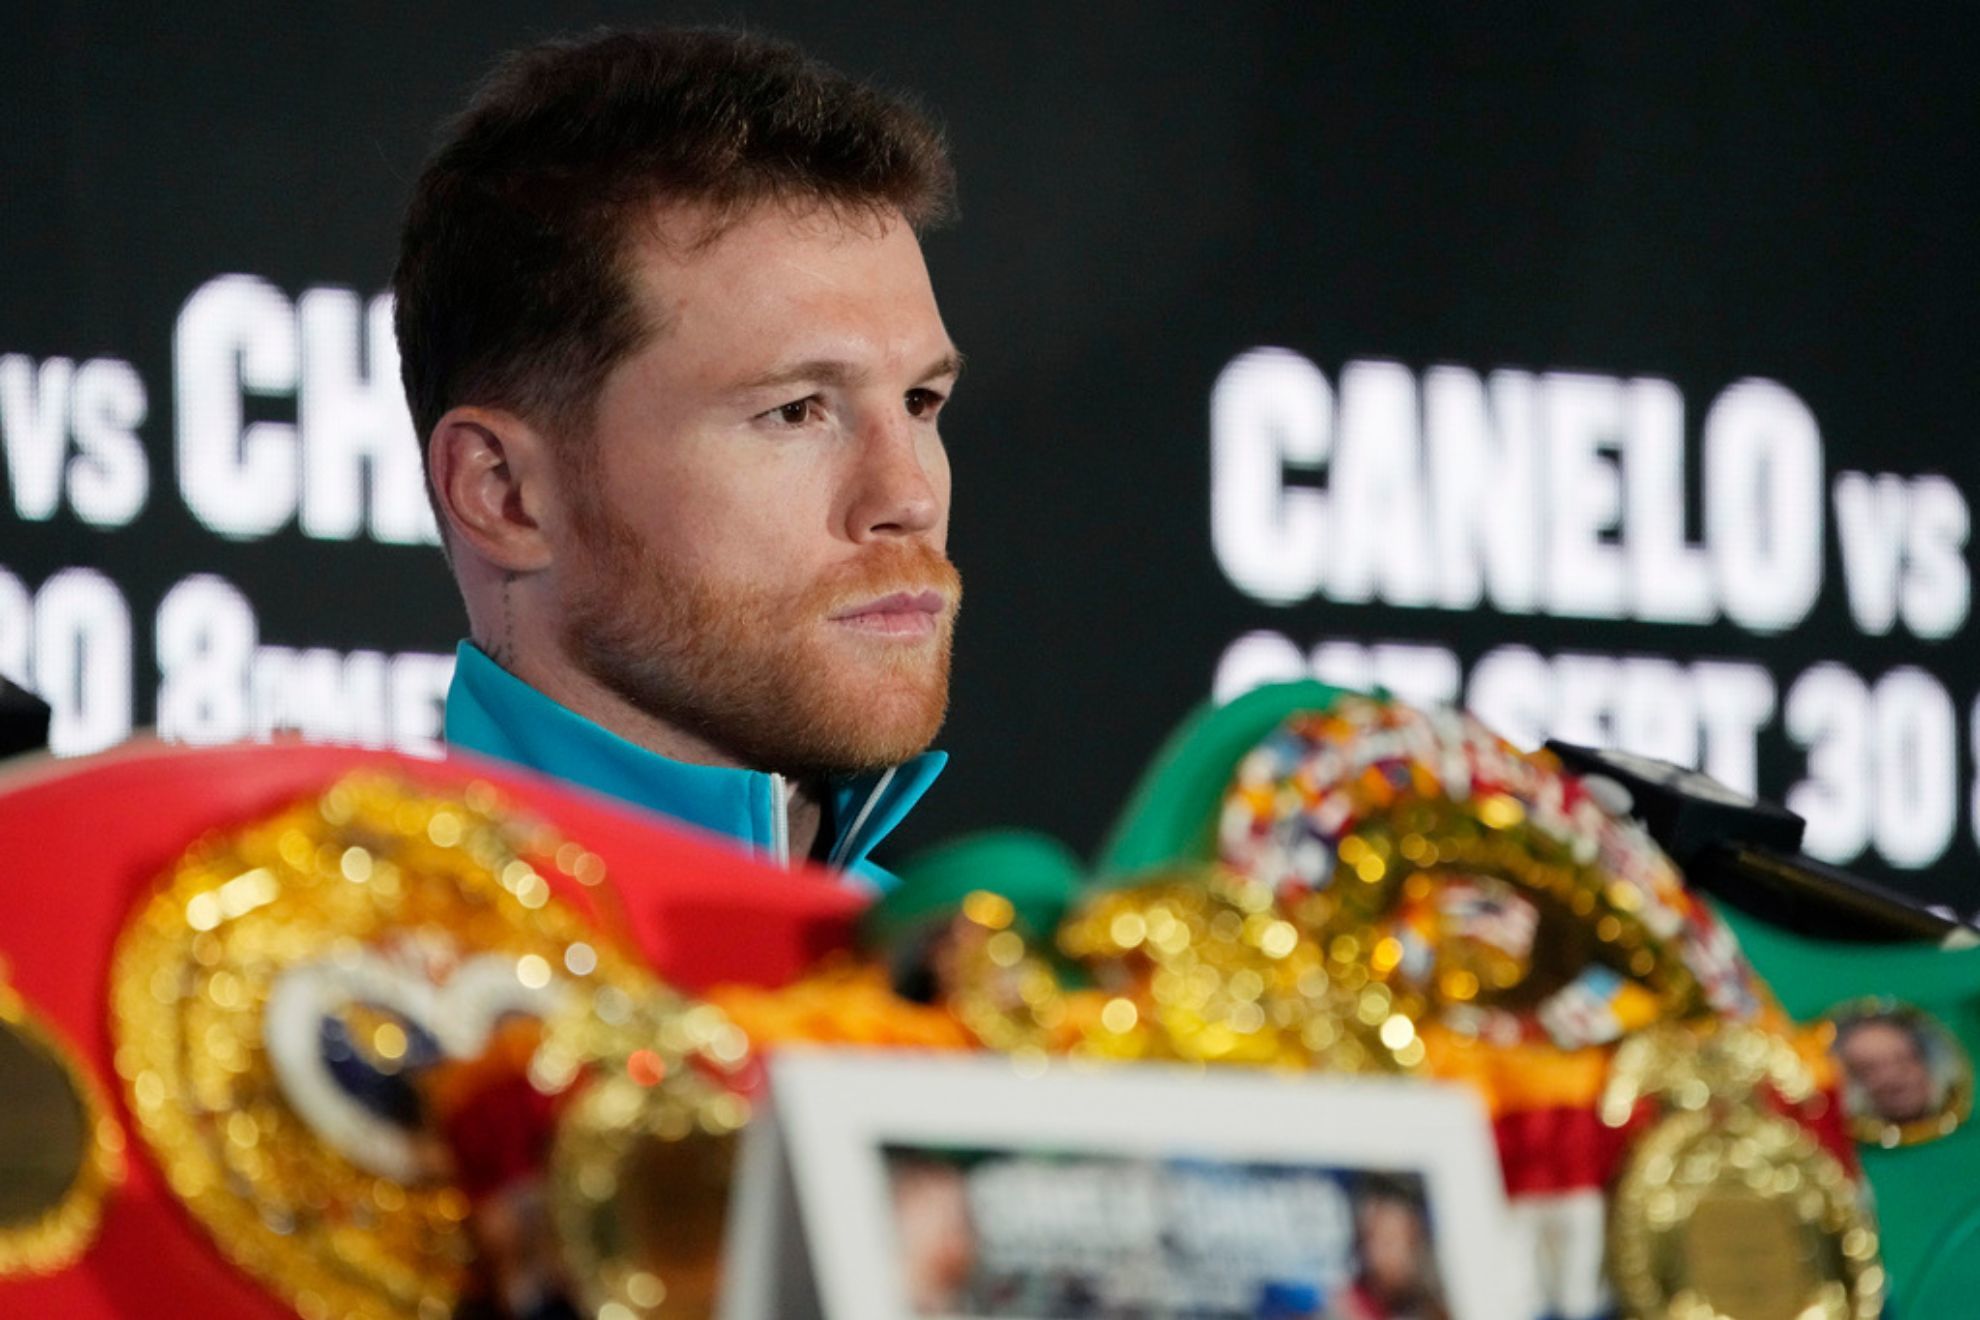 Canelo is receiving criticism from Malignaggi